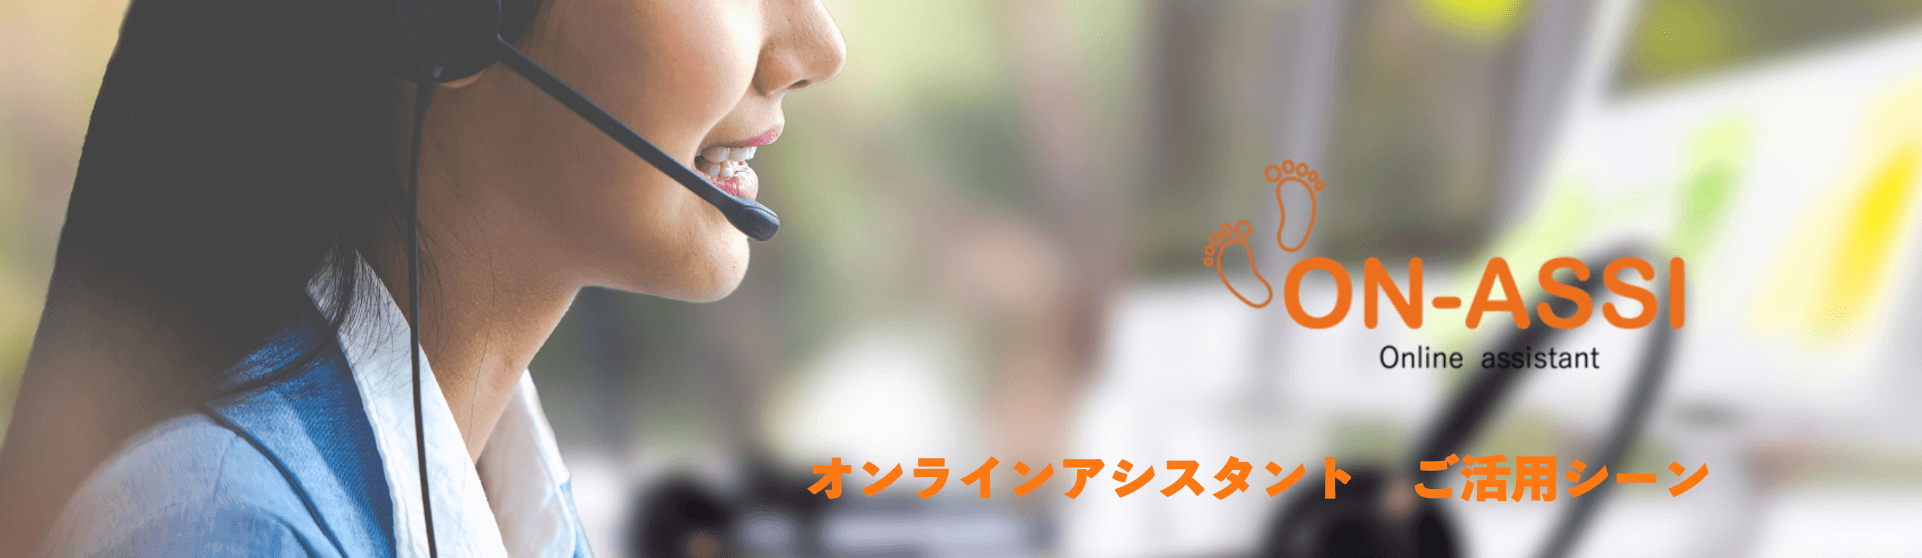 Featured image for “最近のオンラインアシスタント“ON-ASSI”　ご活用シーン”